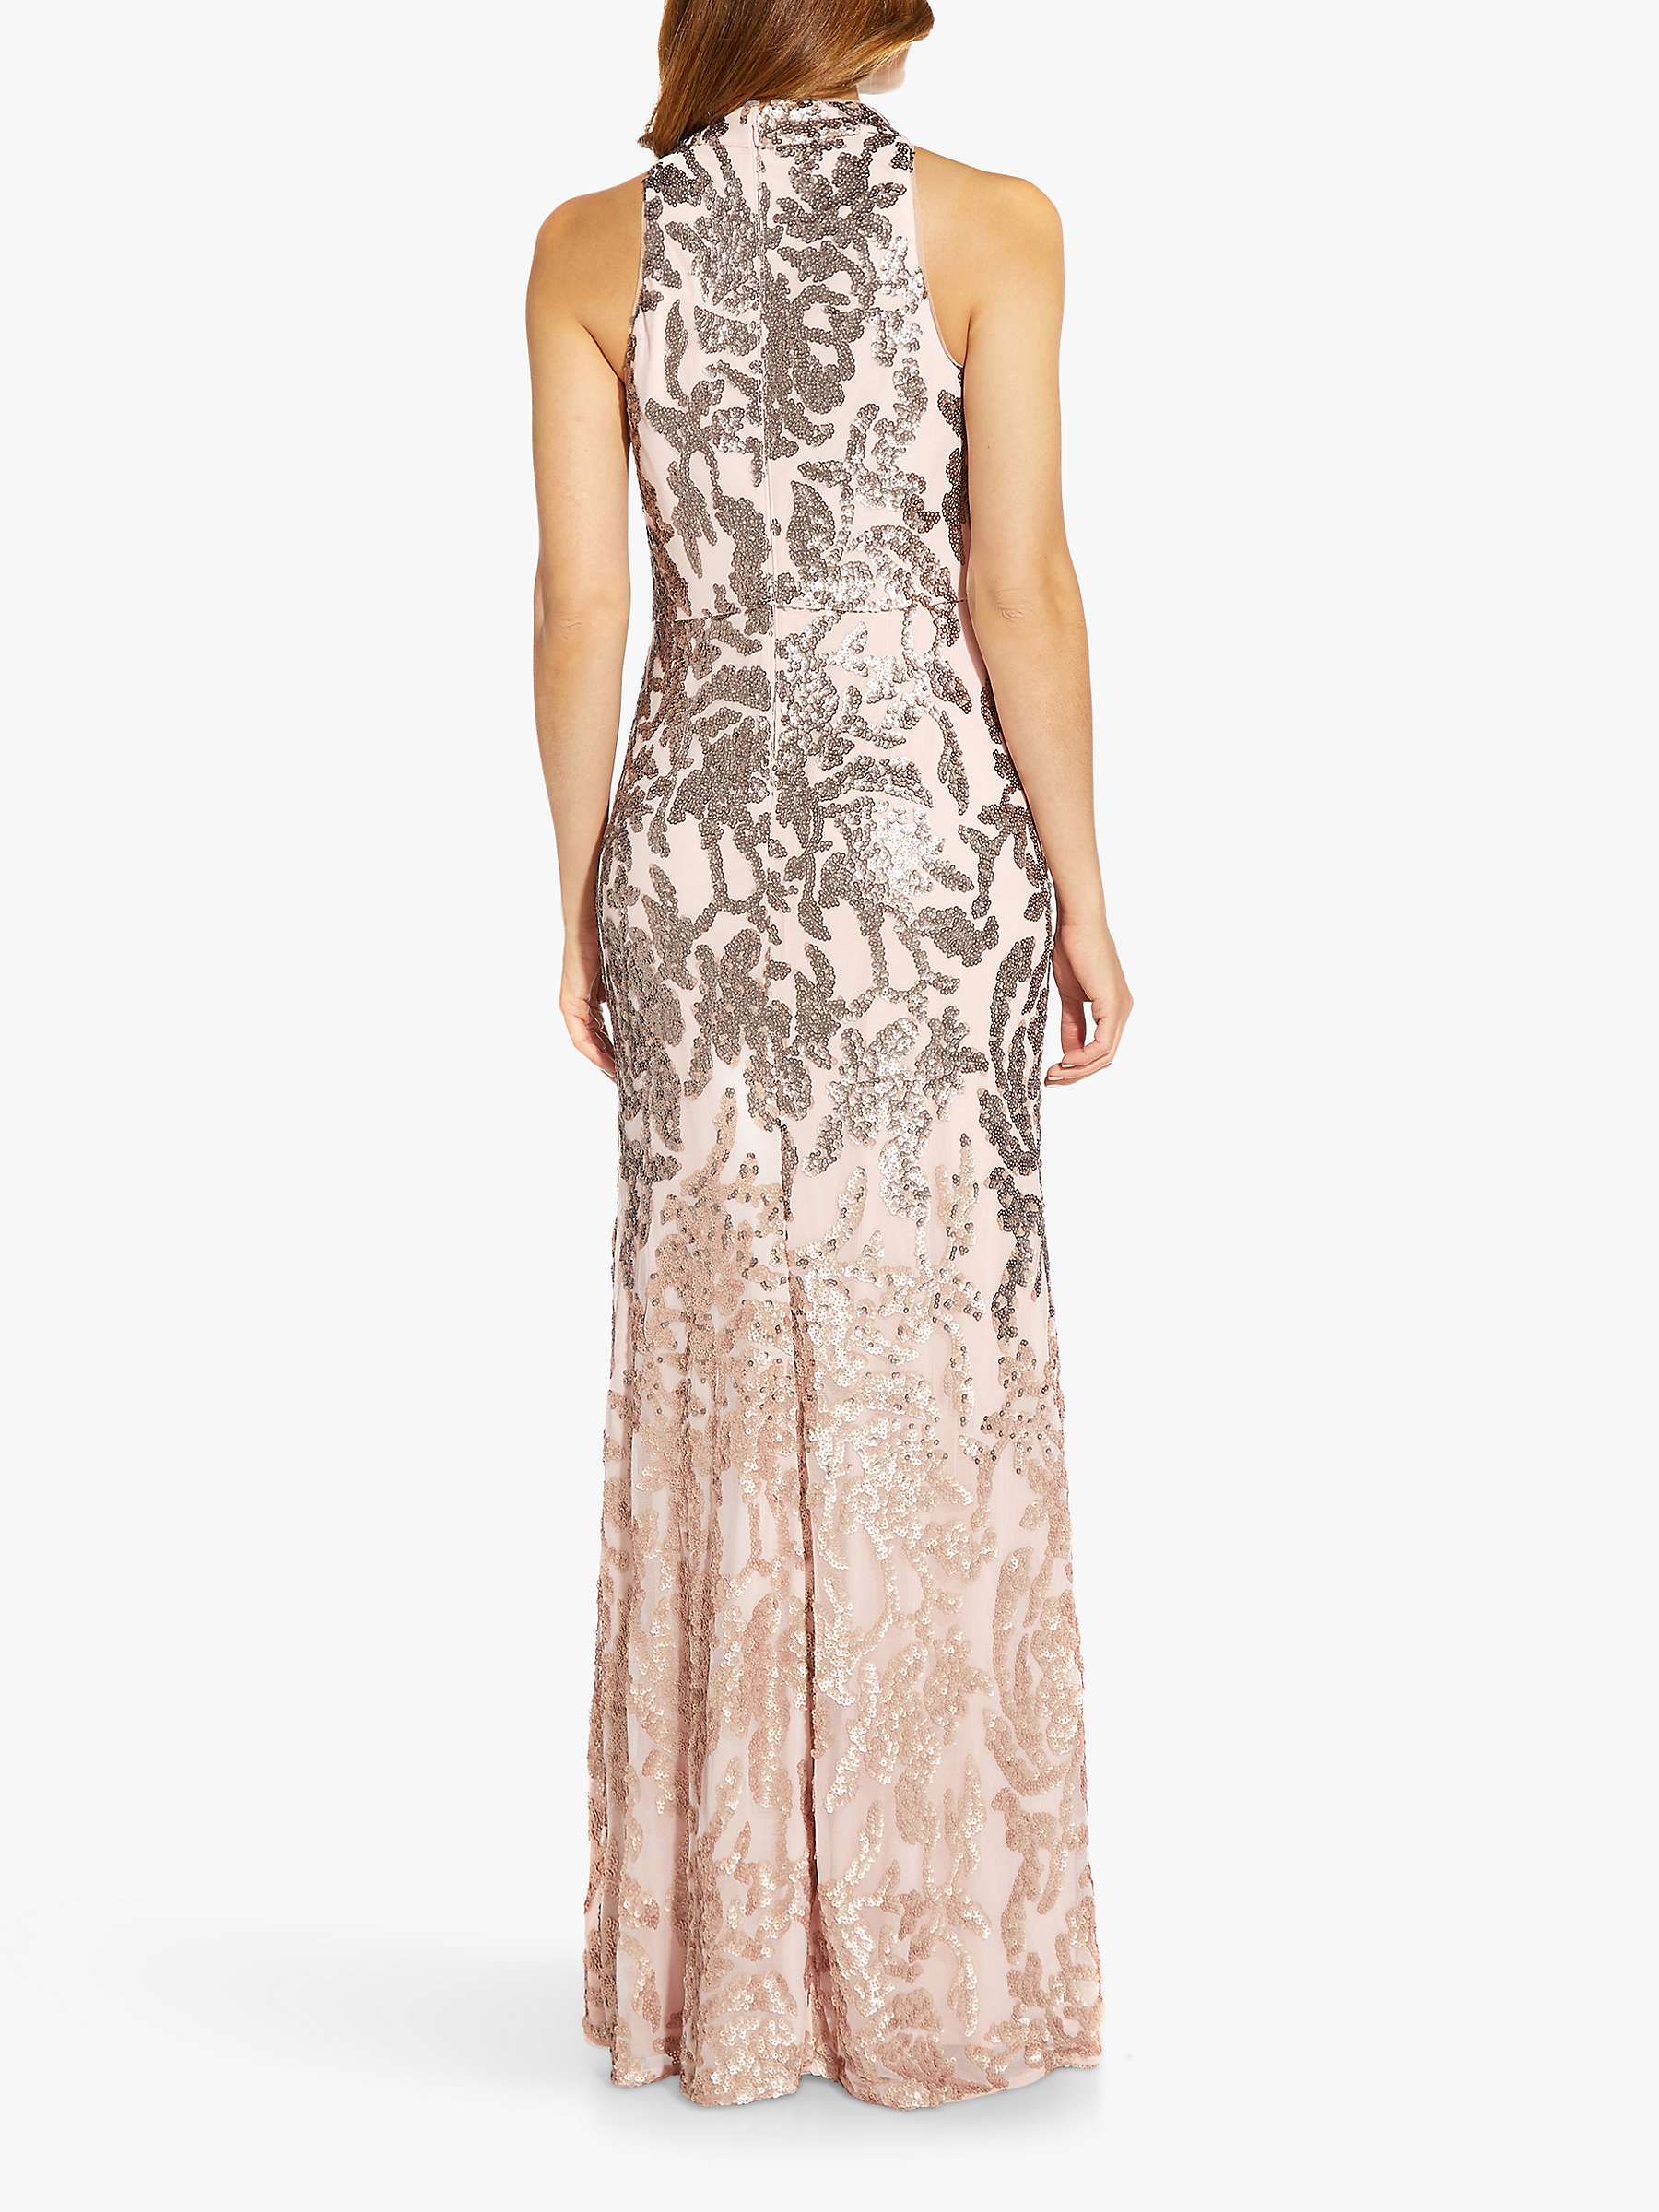 Adrianna Papell Ombre Sequin Dress ...